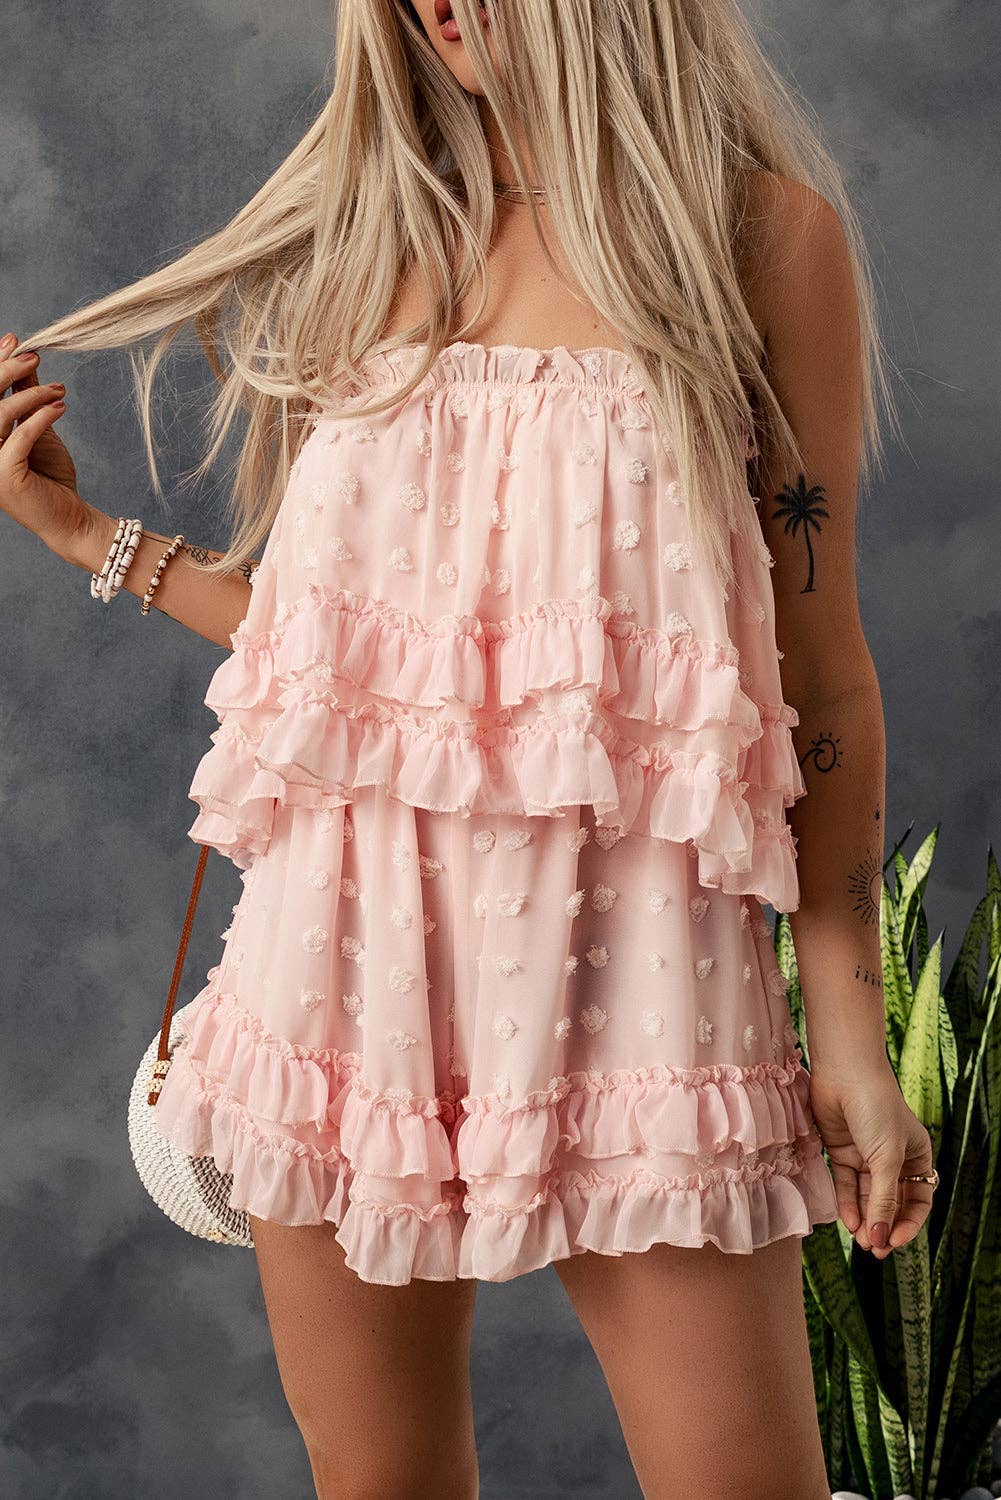 FULL TIME PURCHASE - Pink Swiss Dot Frill Tiered Strapless Romper